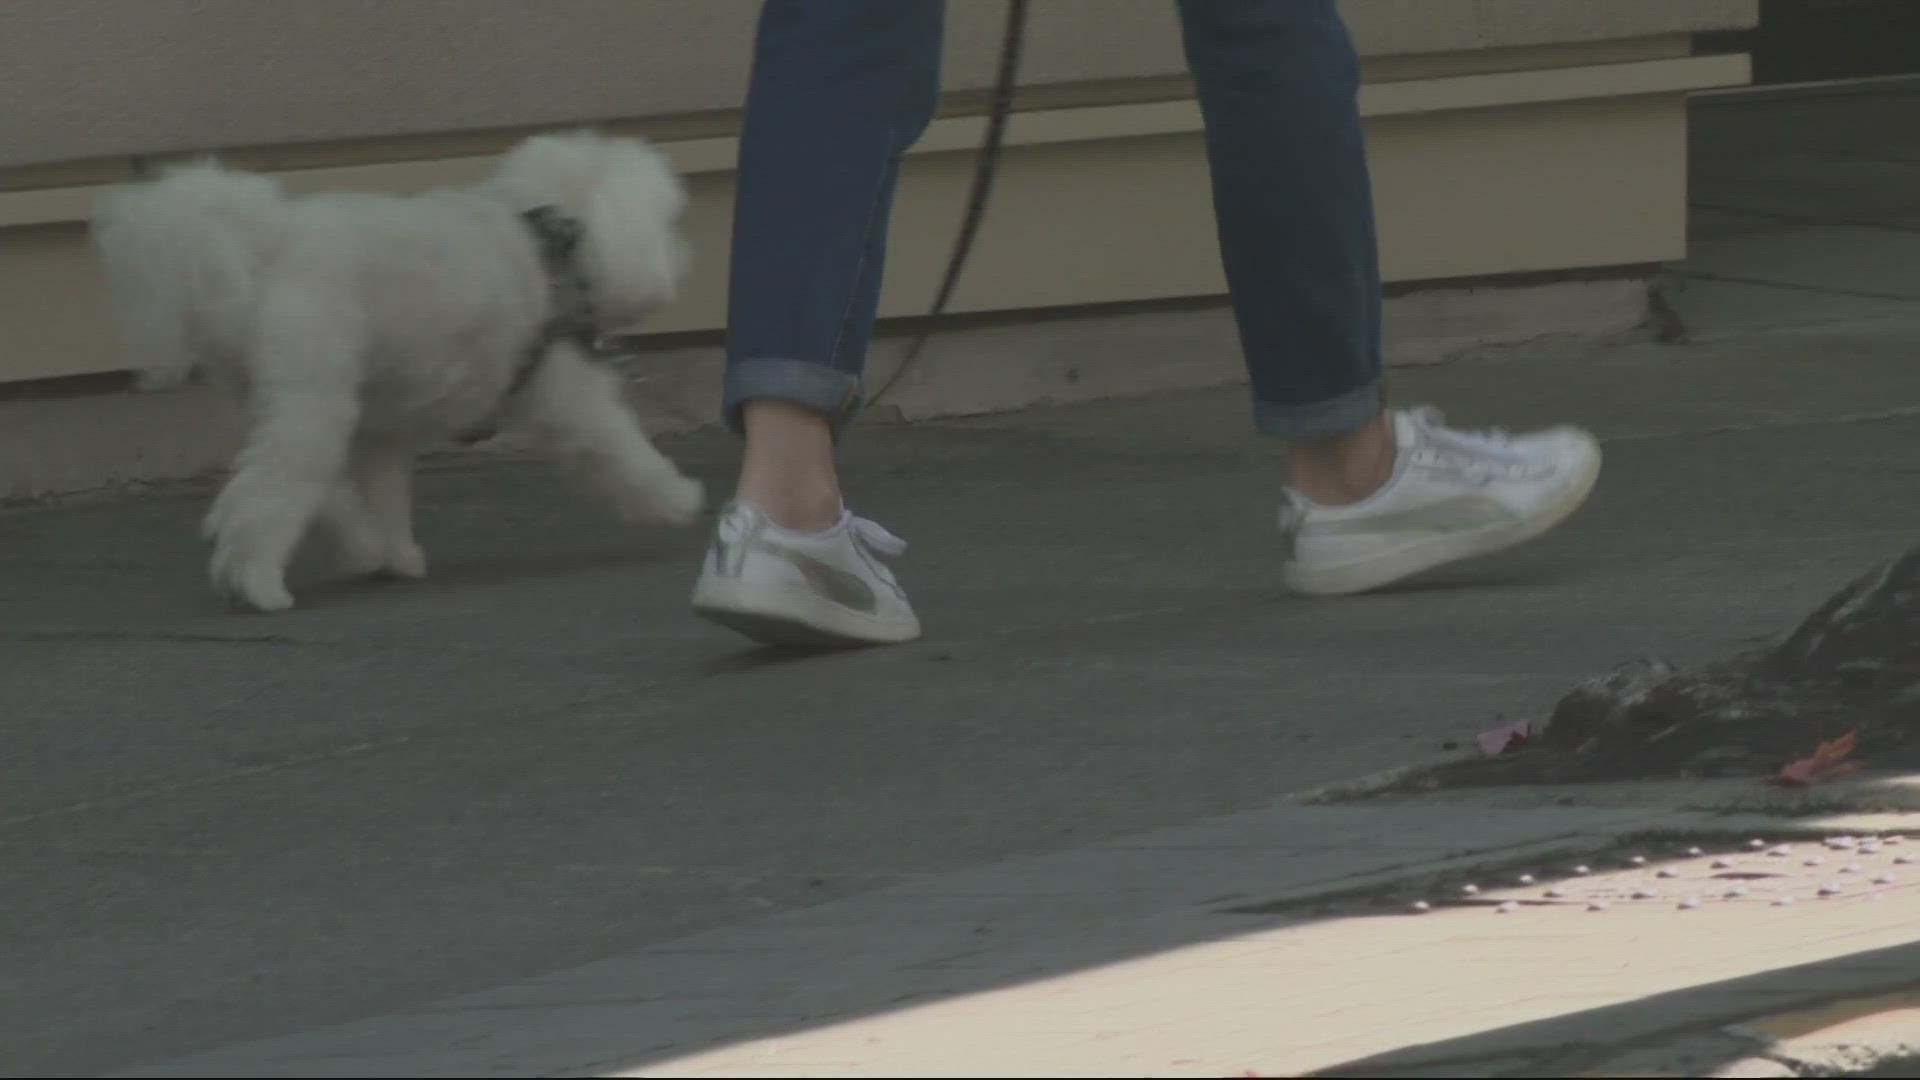 Dove Lewis Veterinary Emergency Hospital in Northwest Portland said it has seen three dogs this week who overdosed on fentanyl.